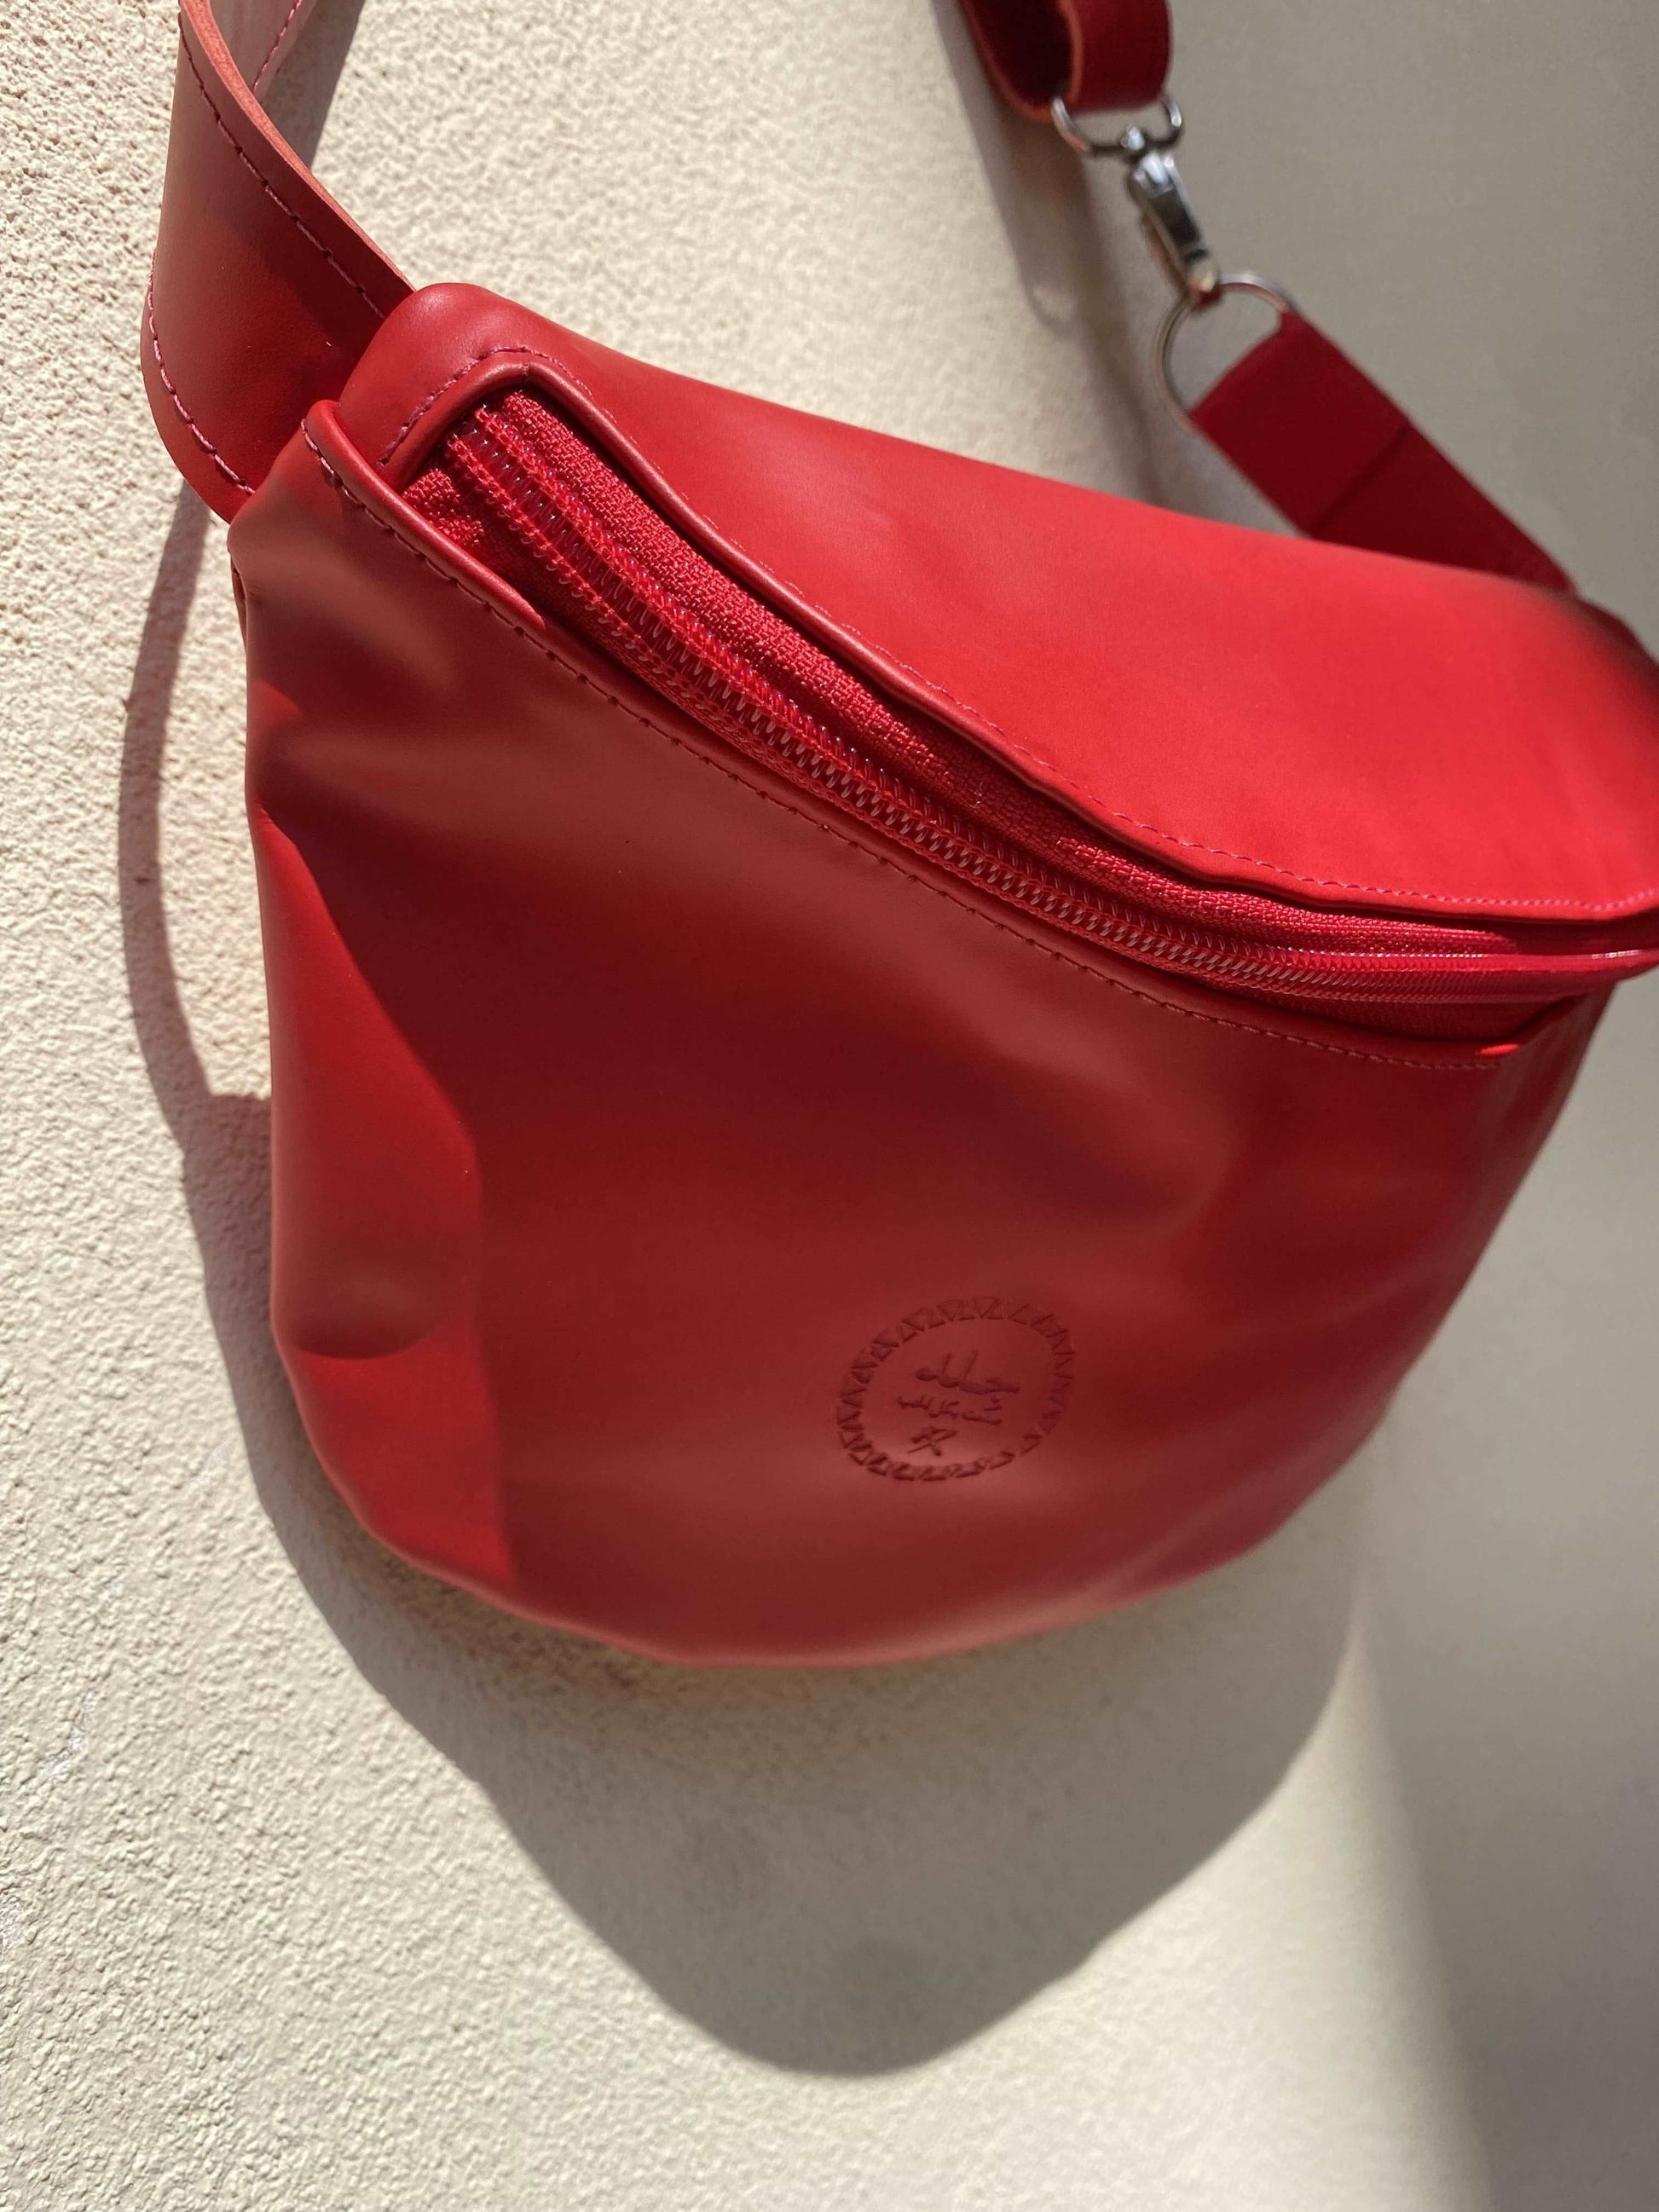 leather-fanny-pack-red-bag